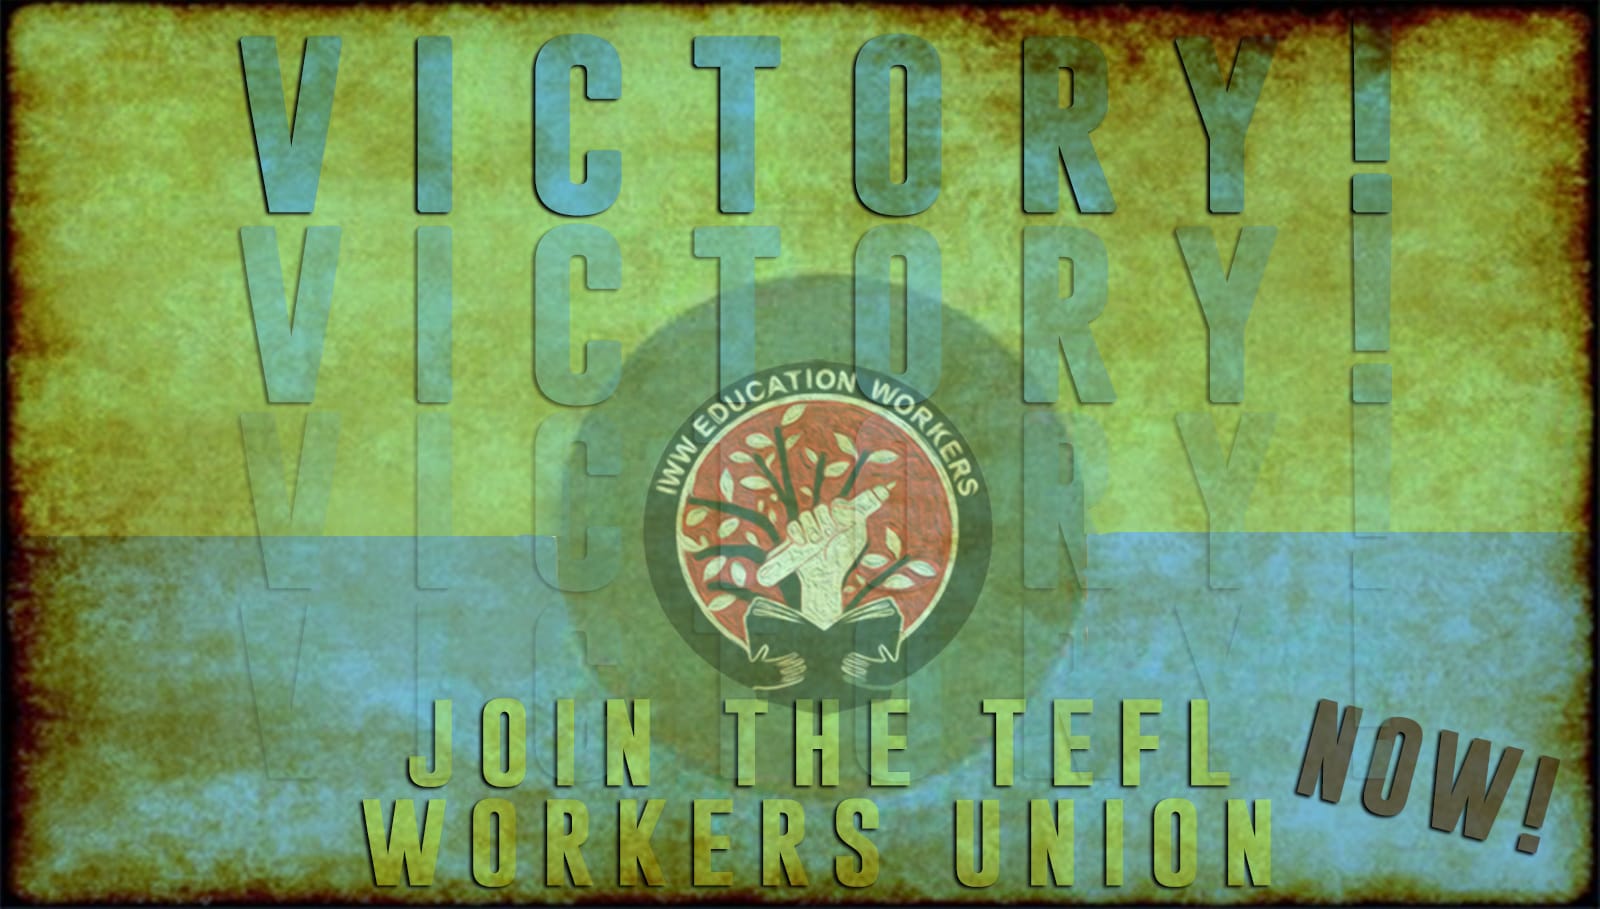 Image shows the TEFL Union logo. Above it, it says "victory". Below it, it says "join the TEFL Workers' Union"